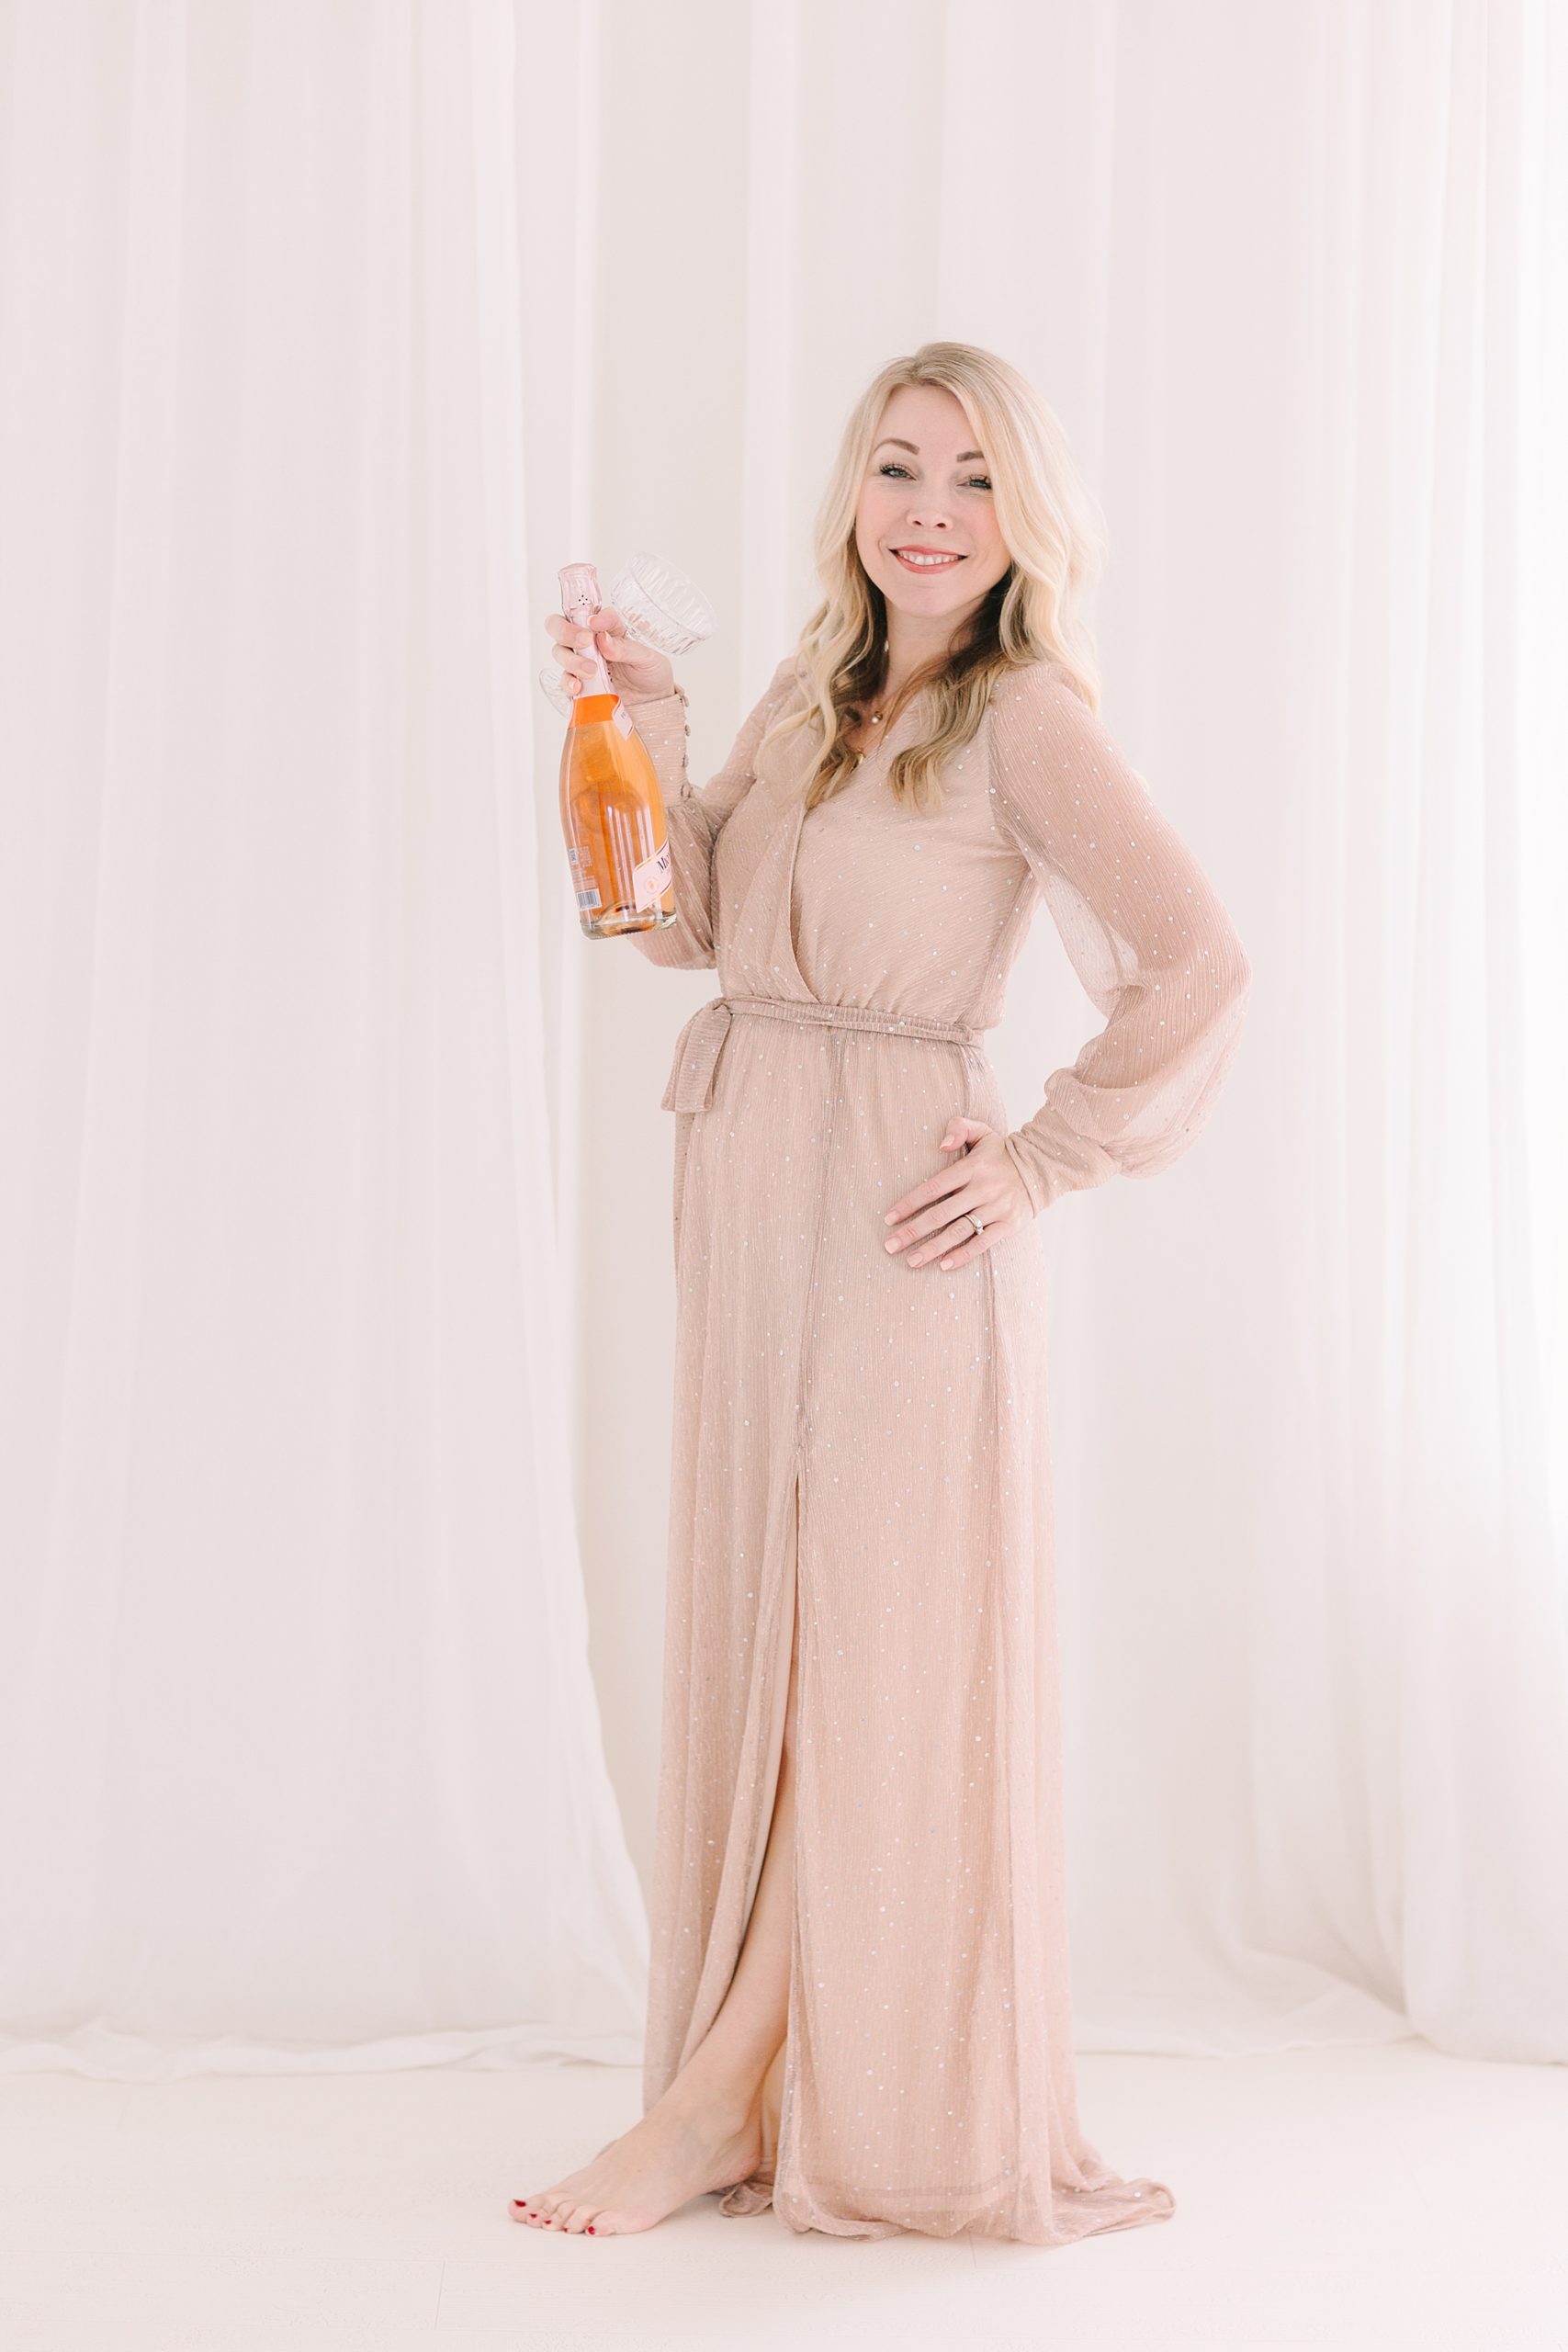 woman in floor-length tan dress holds bottle of pink champagne